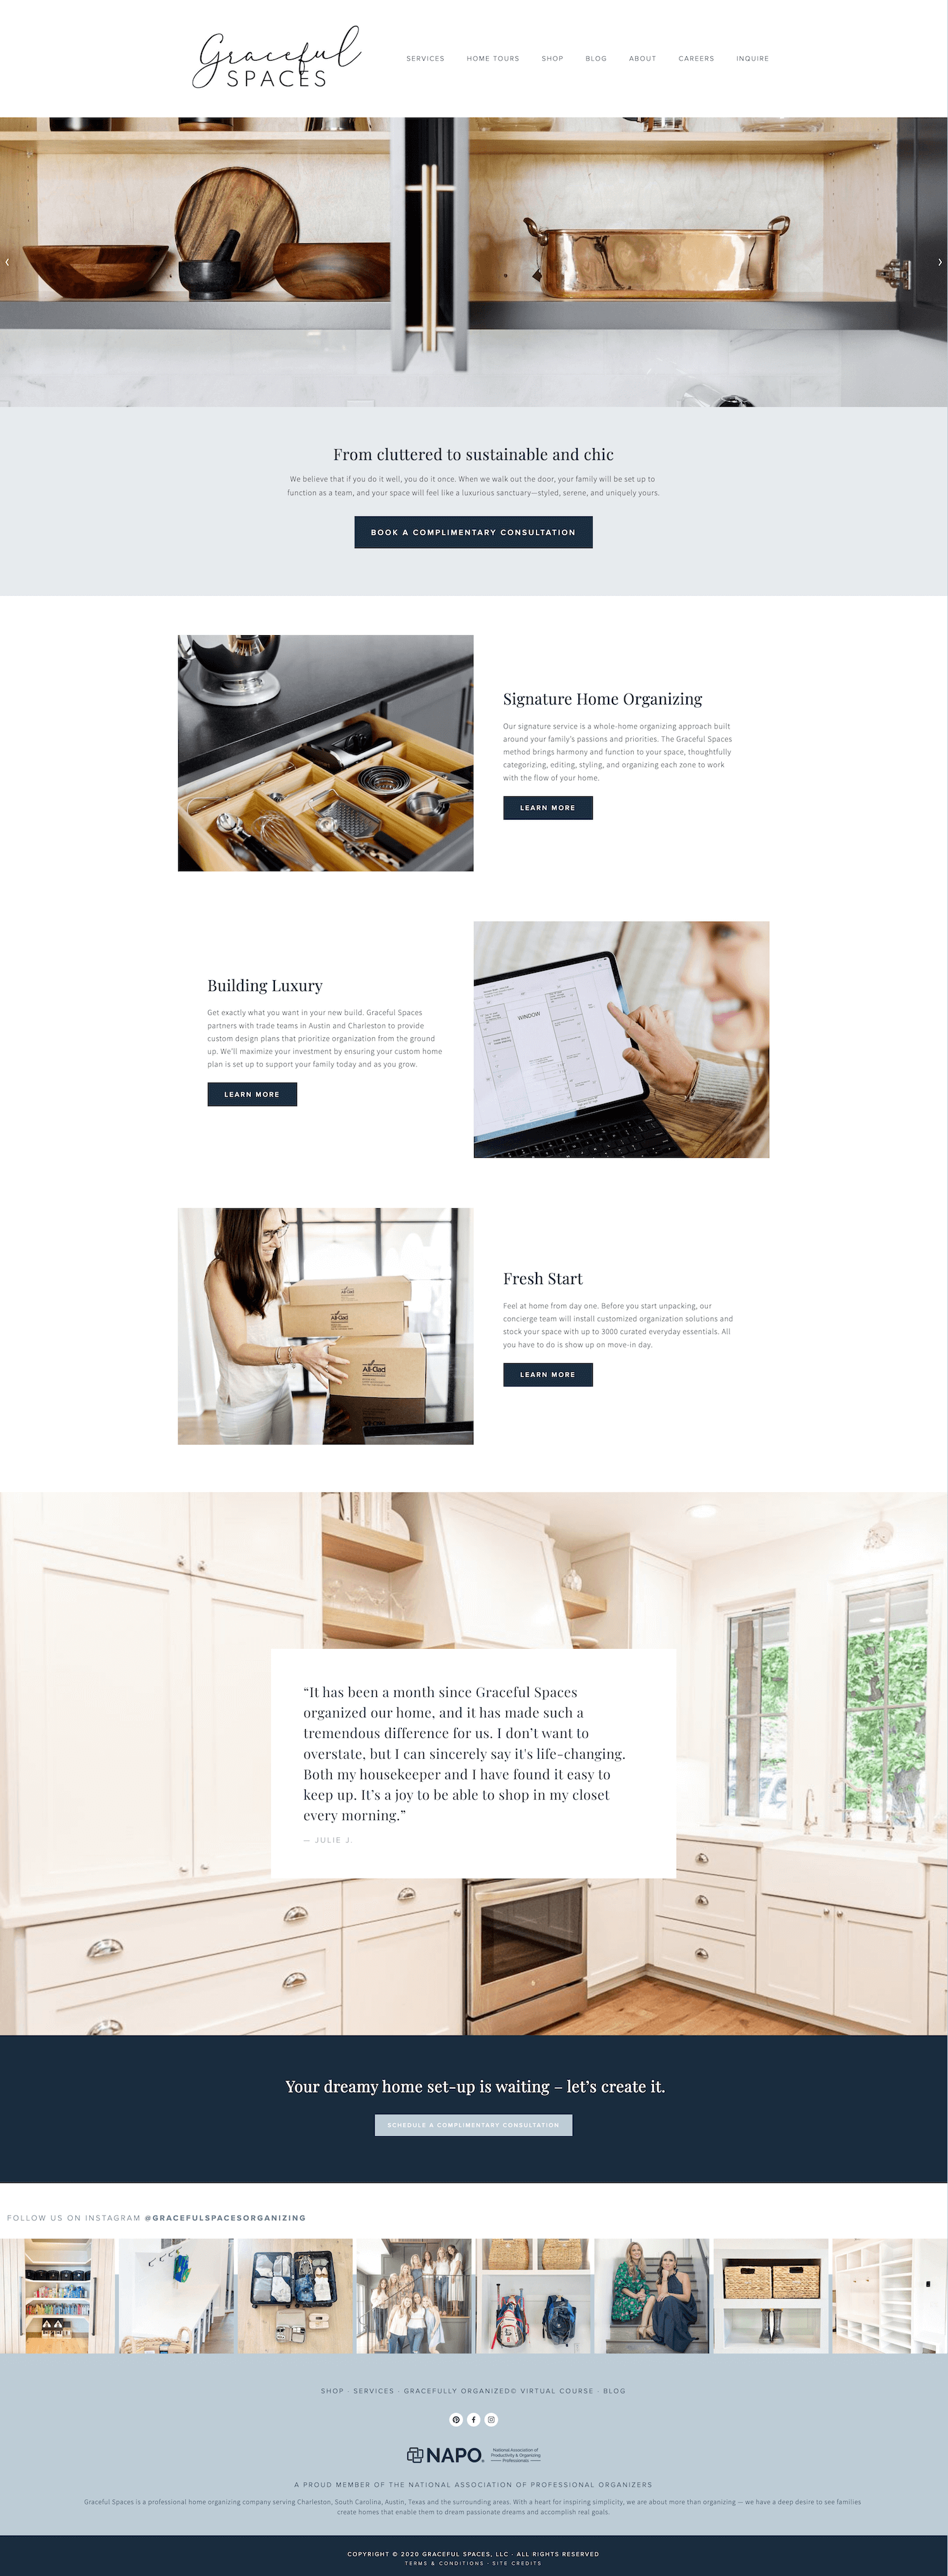 Graceful Spaces Squarespace website designed by Alexa B. Taylor